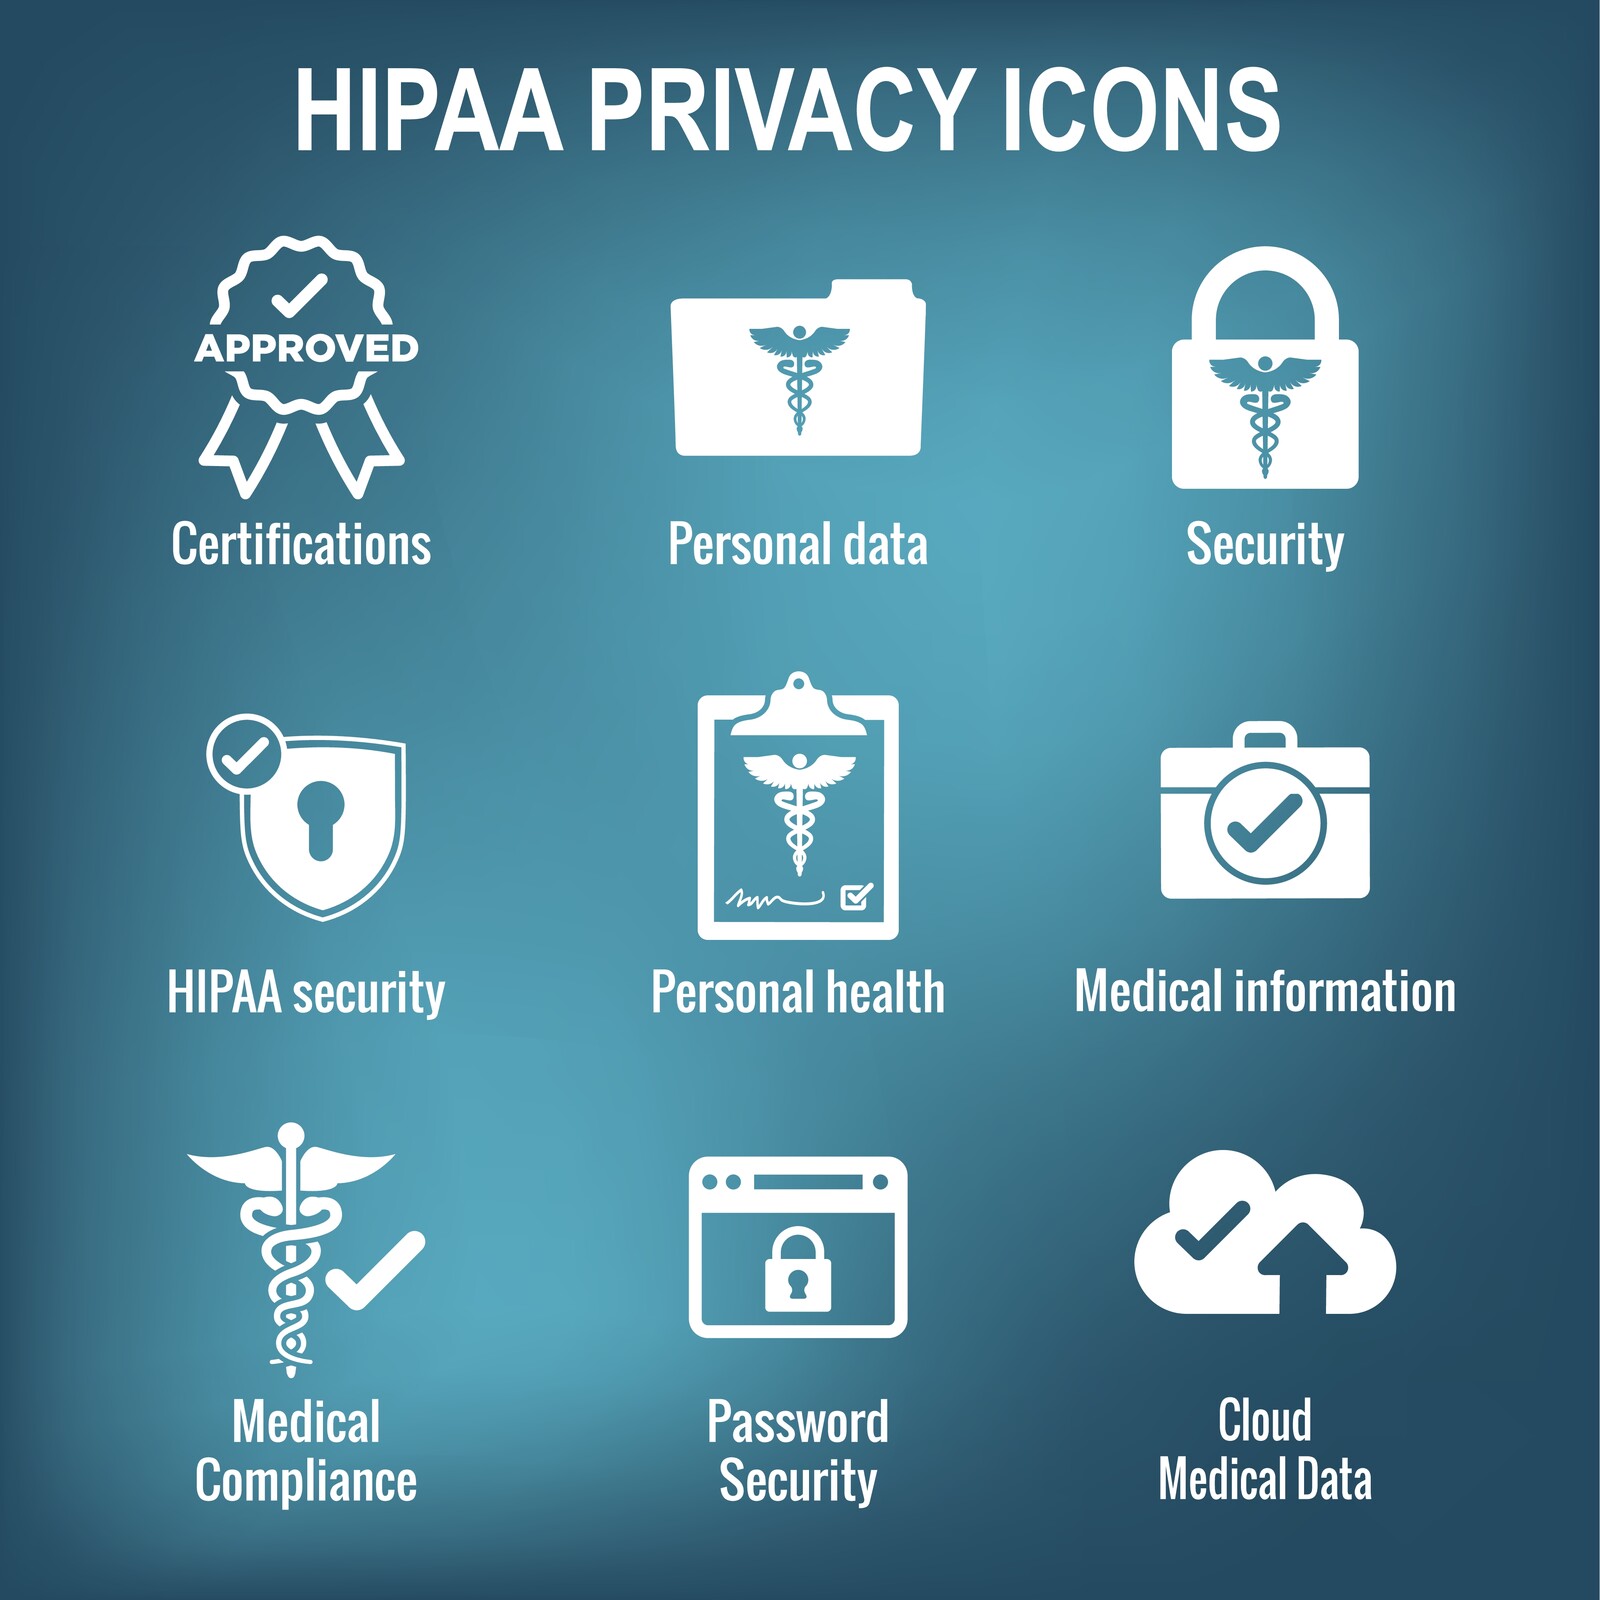 HIPAA Privacy Rule Canstockphoto81660240 